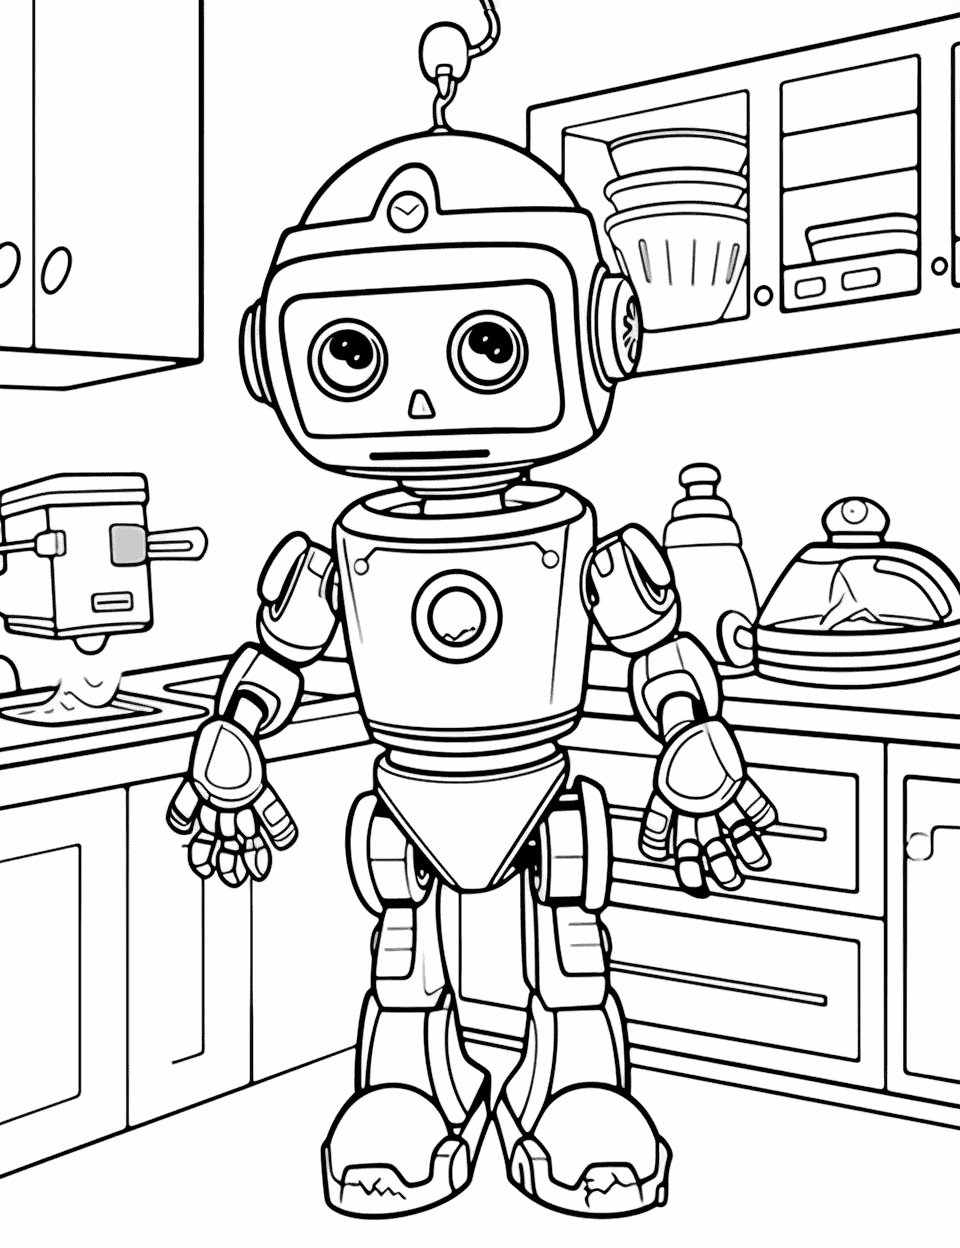 Chef Robot Cooking in a High-Tech Kitchen Coloring Page - A robot chef in a modern, high-tech kitchen.